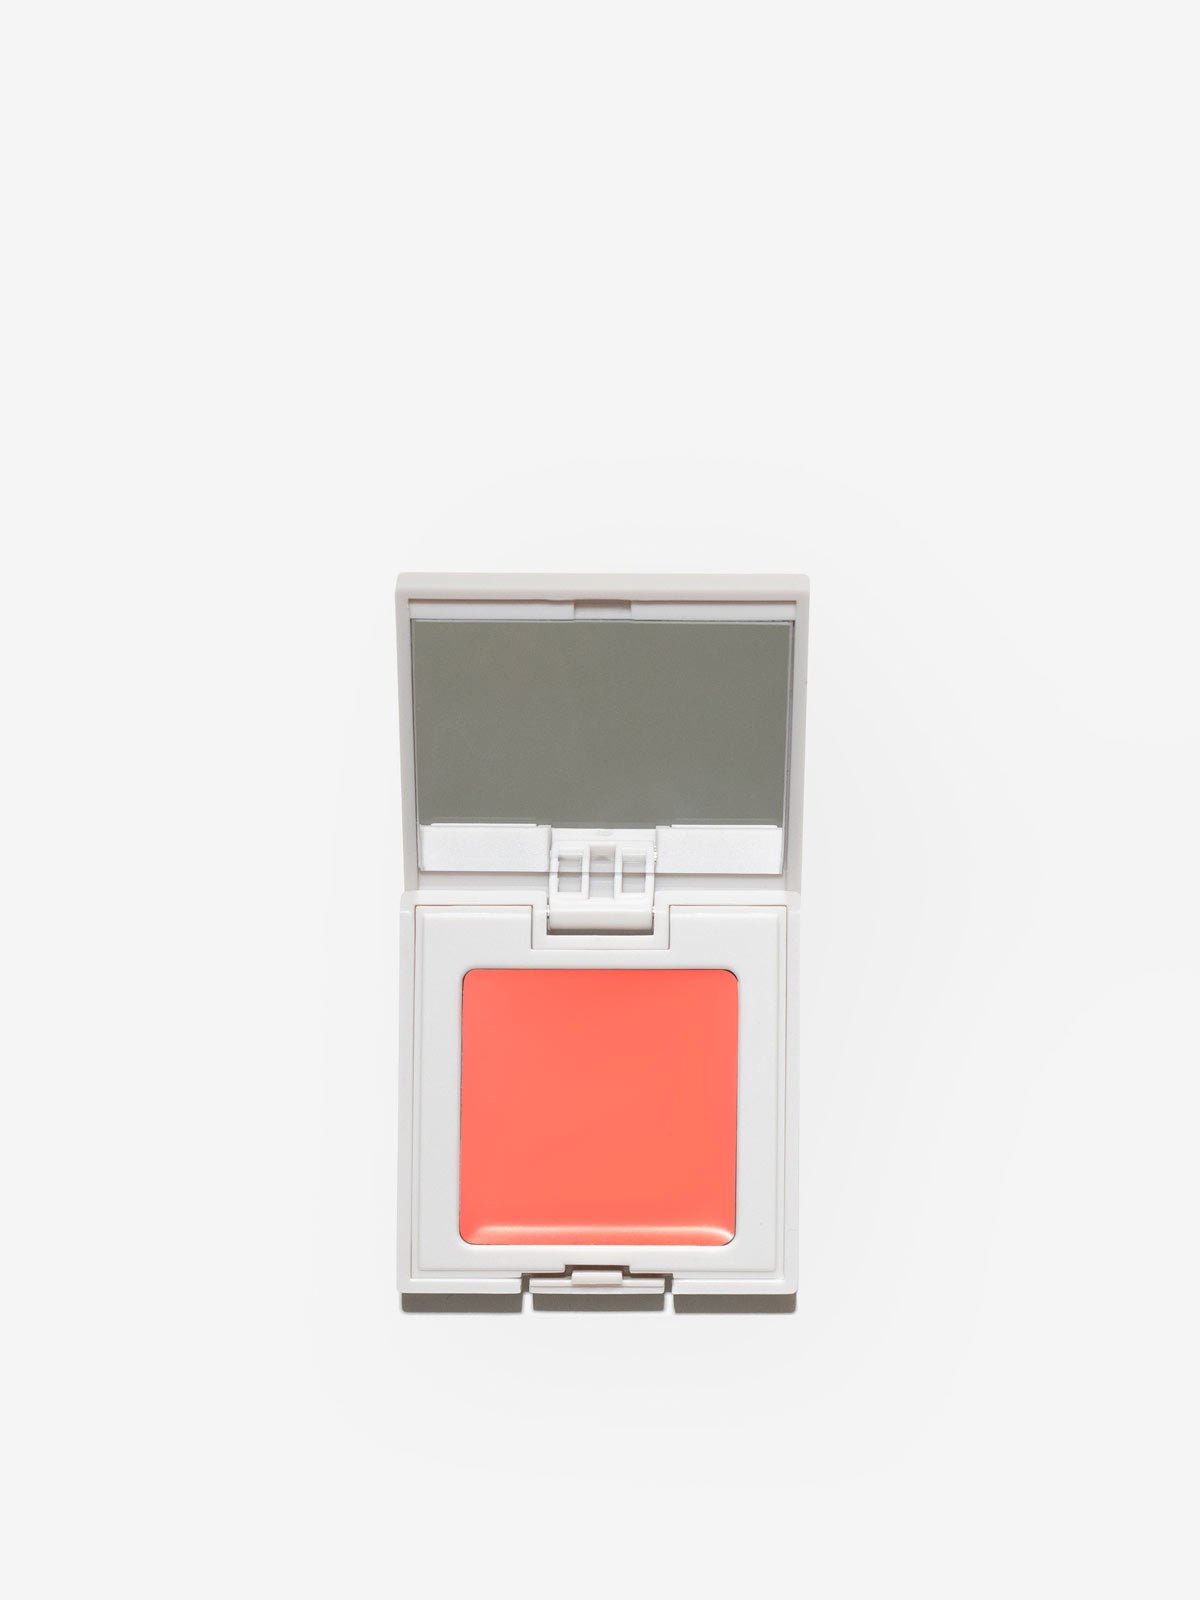 FRONT IMAGE OF REFY CREAM BLUSH IN SHADE PEACH